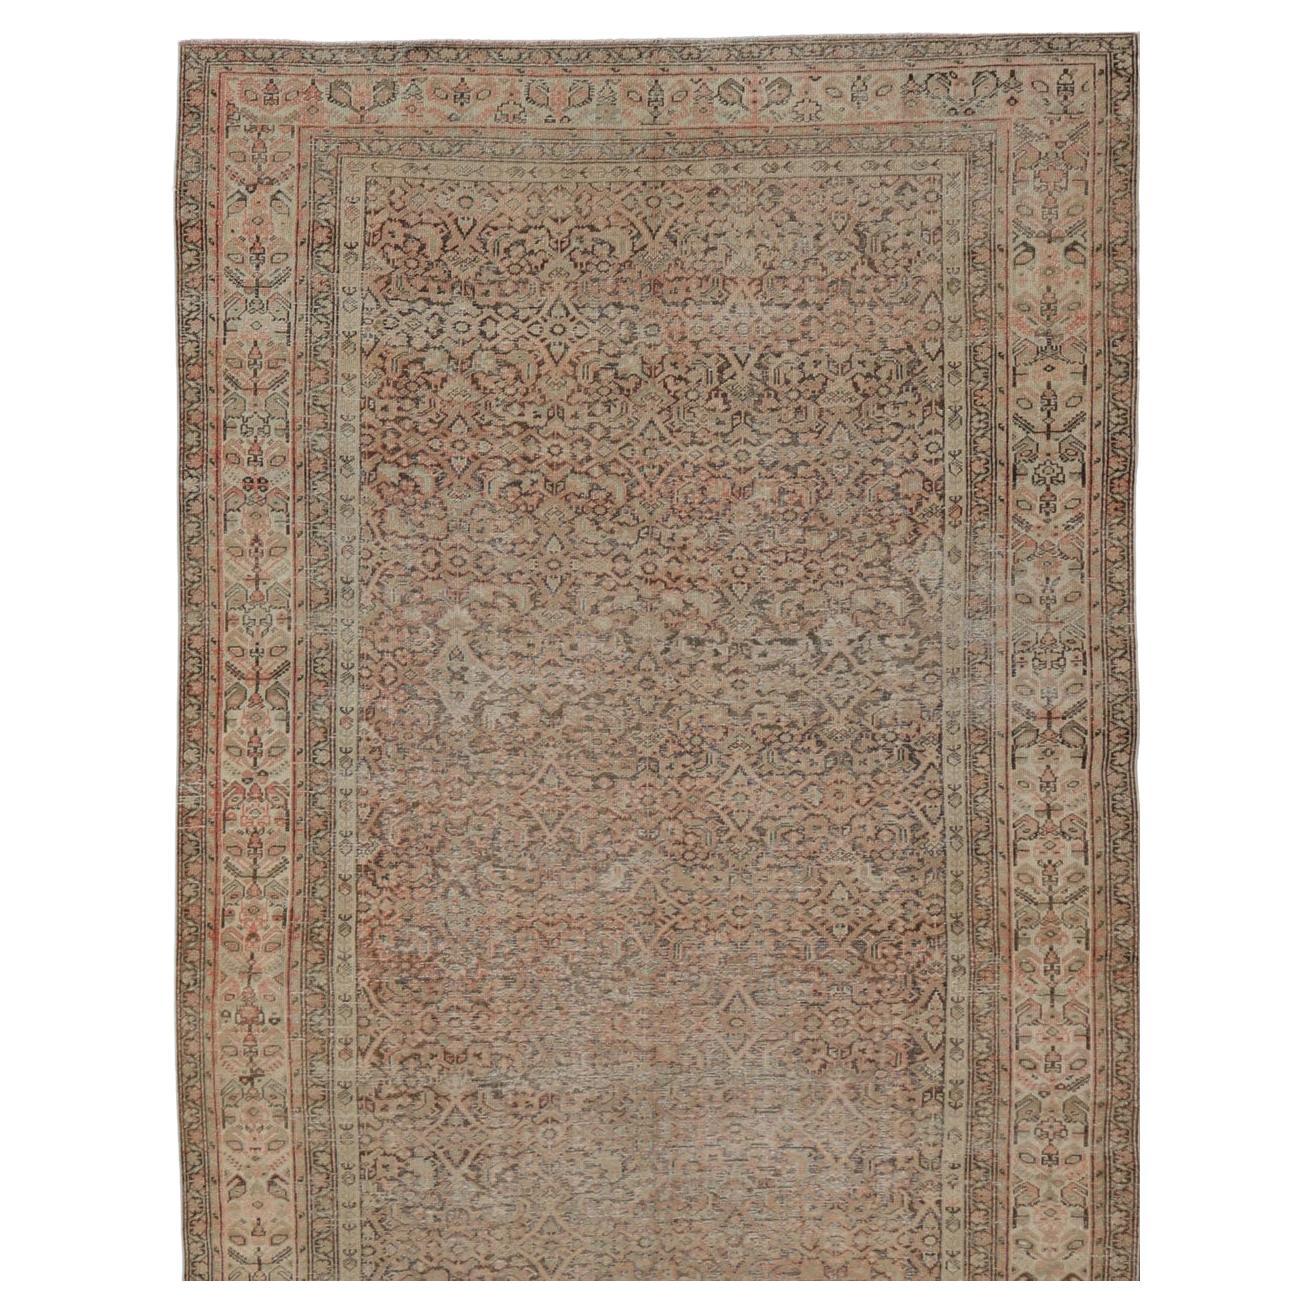 This antique Malayer rug features a modest, multi-tiered border and delicate field, busy with an all-over symmetrical design. This piece sets a quiet coffee background behind muted shades of salmon, tan, and taupe. Earthy olive undertones can be